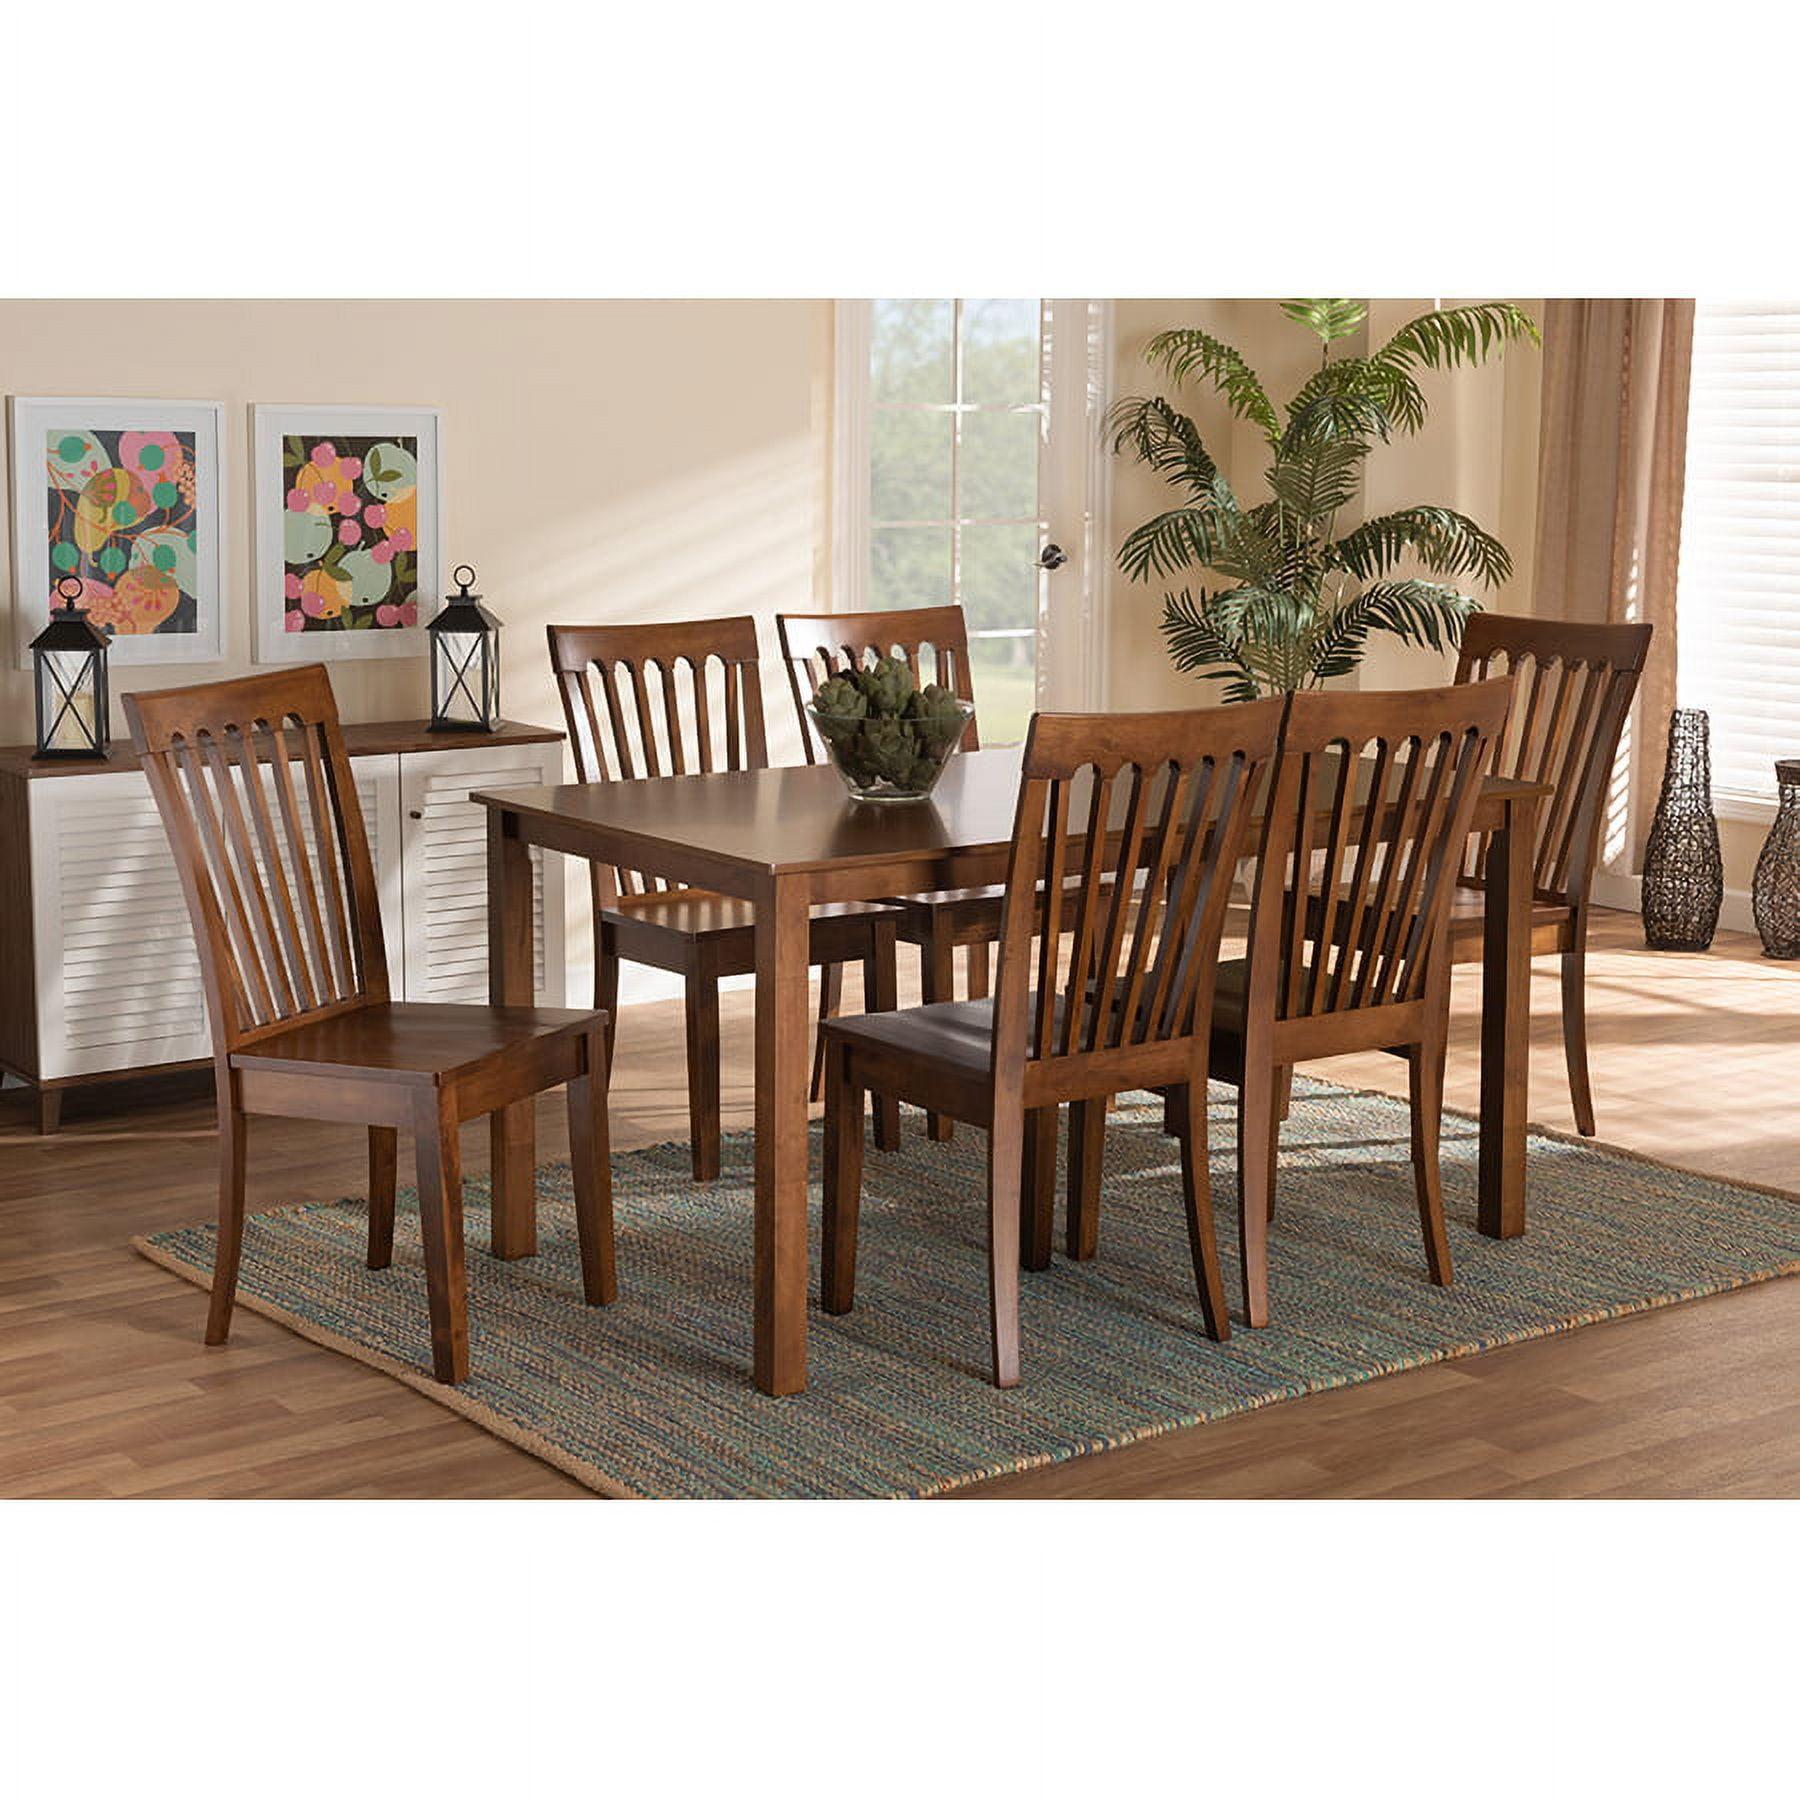 Erion Walnut Brown Wood 7-Piece Modern Dining Set with Cut-Out Chairs